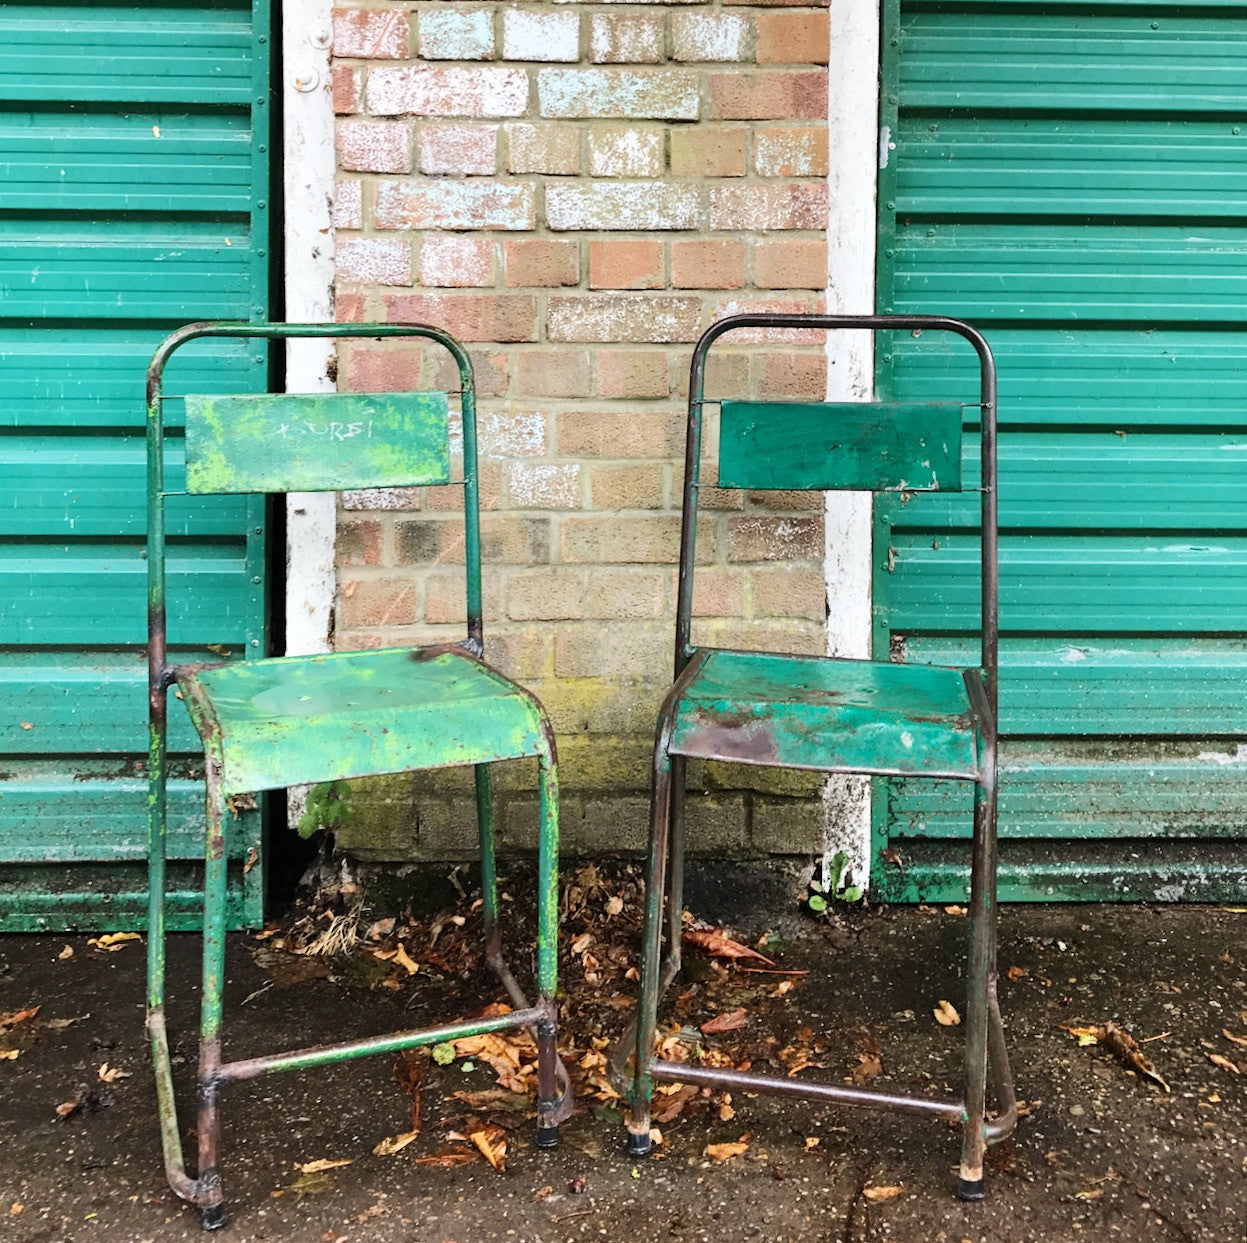 Pair of vintage metal stacking chairs - Green